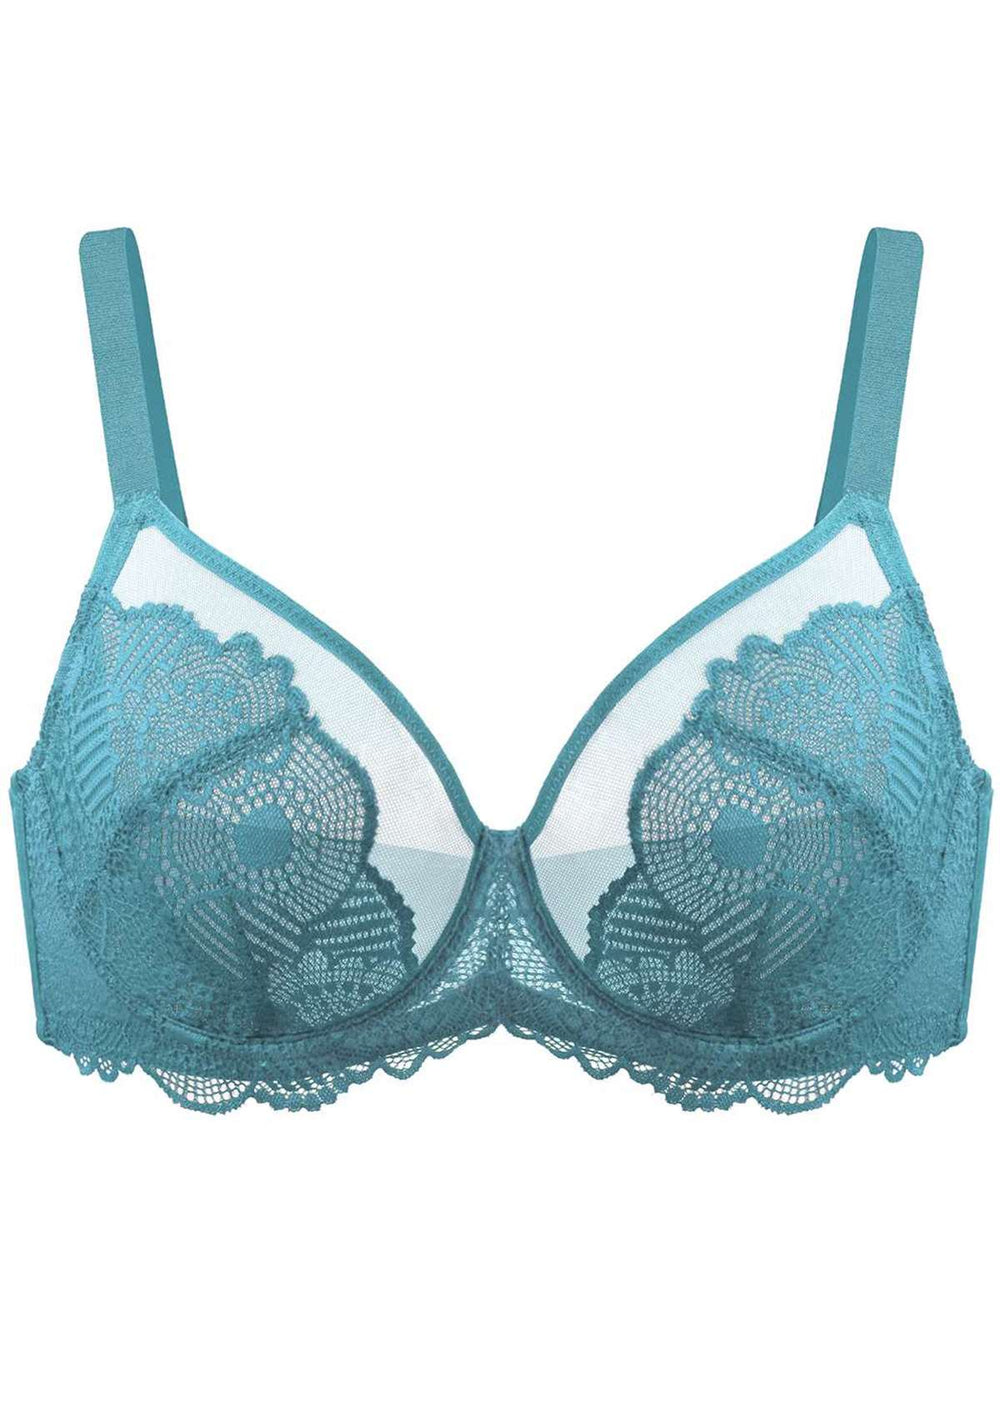 POINTERTECK Sexy Women's Lace Unlined Underwire Push Up Bra Solid Color，Light  Blue#02 